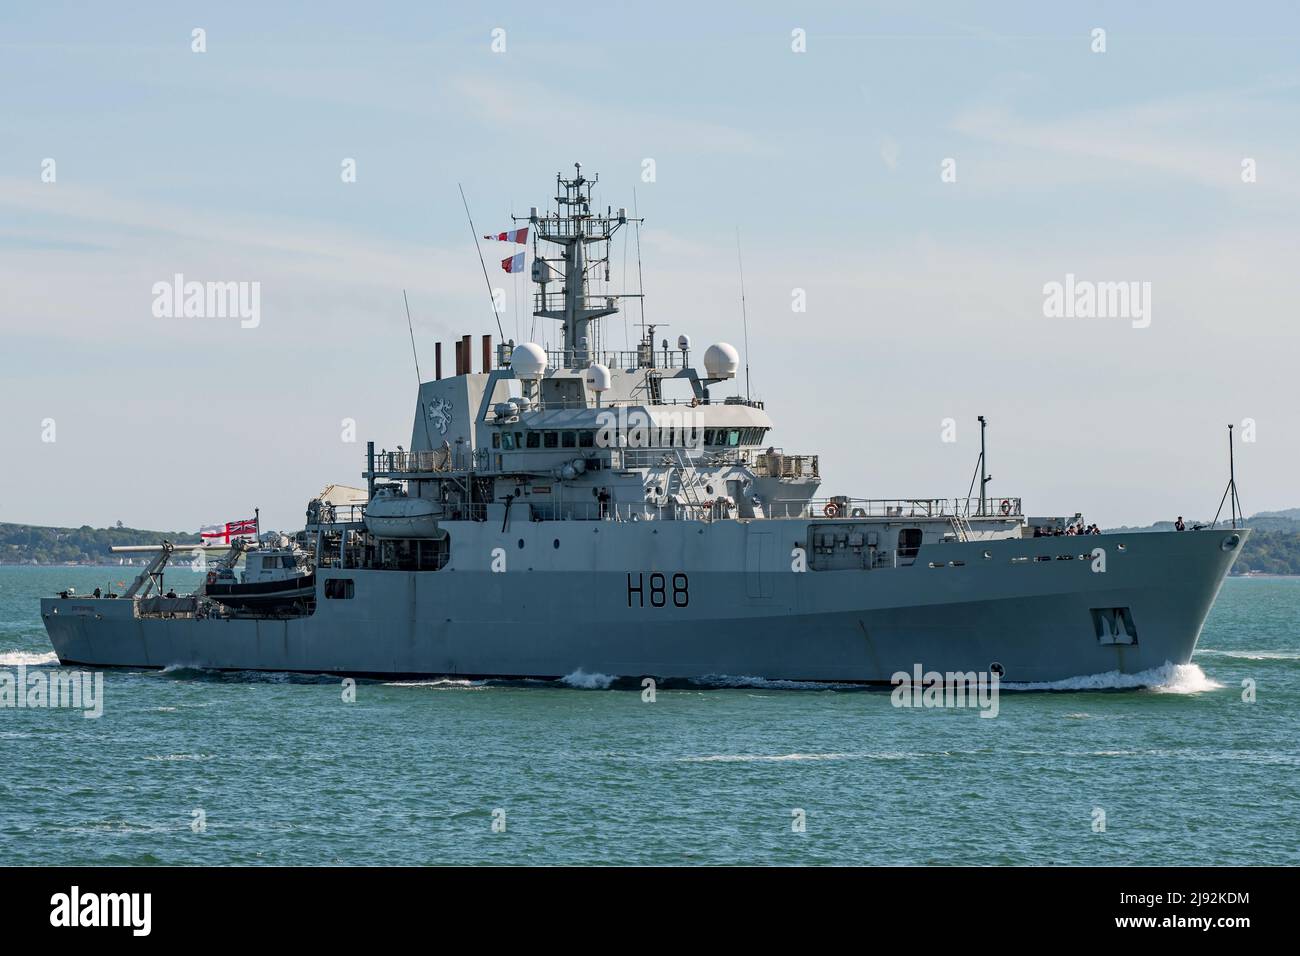 The Royal Navy hydrographic survey ship HMS Enterprise (H88) approaching Portsmouth, UK on the 19th May 2022. Stock Photo